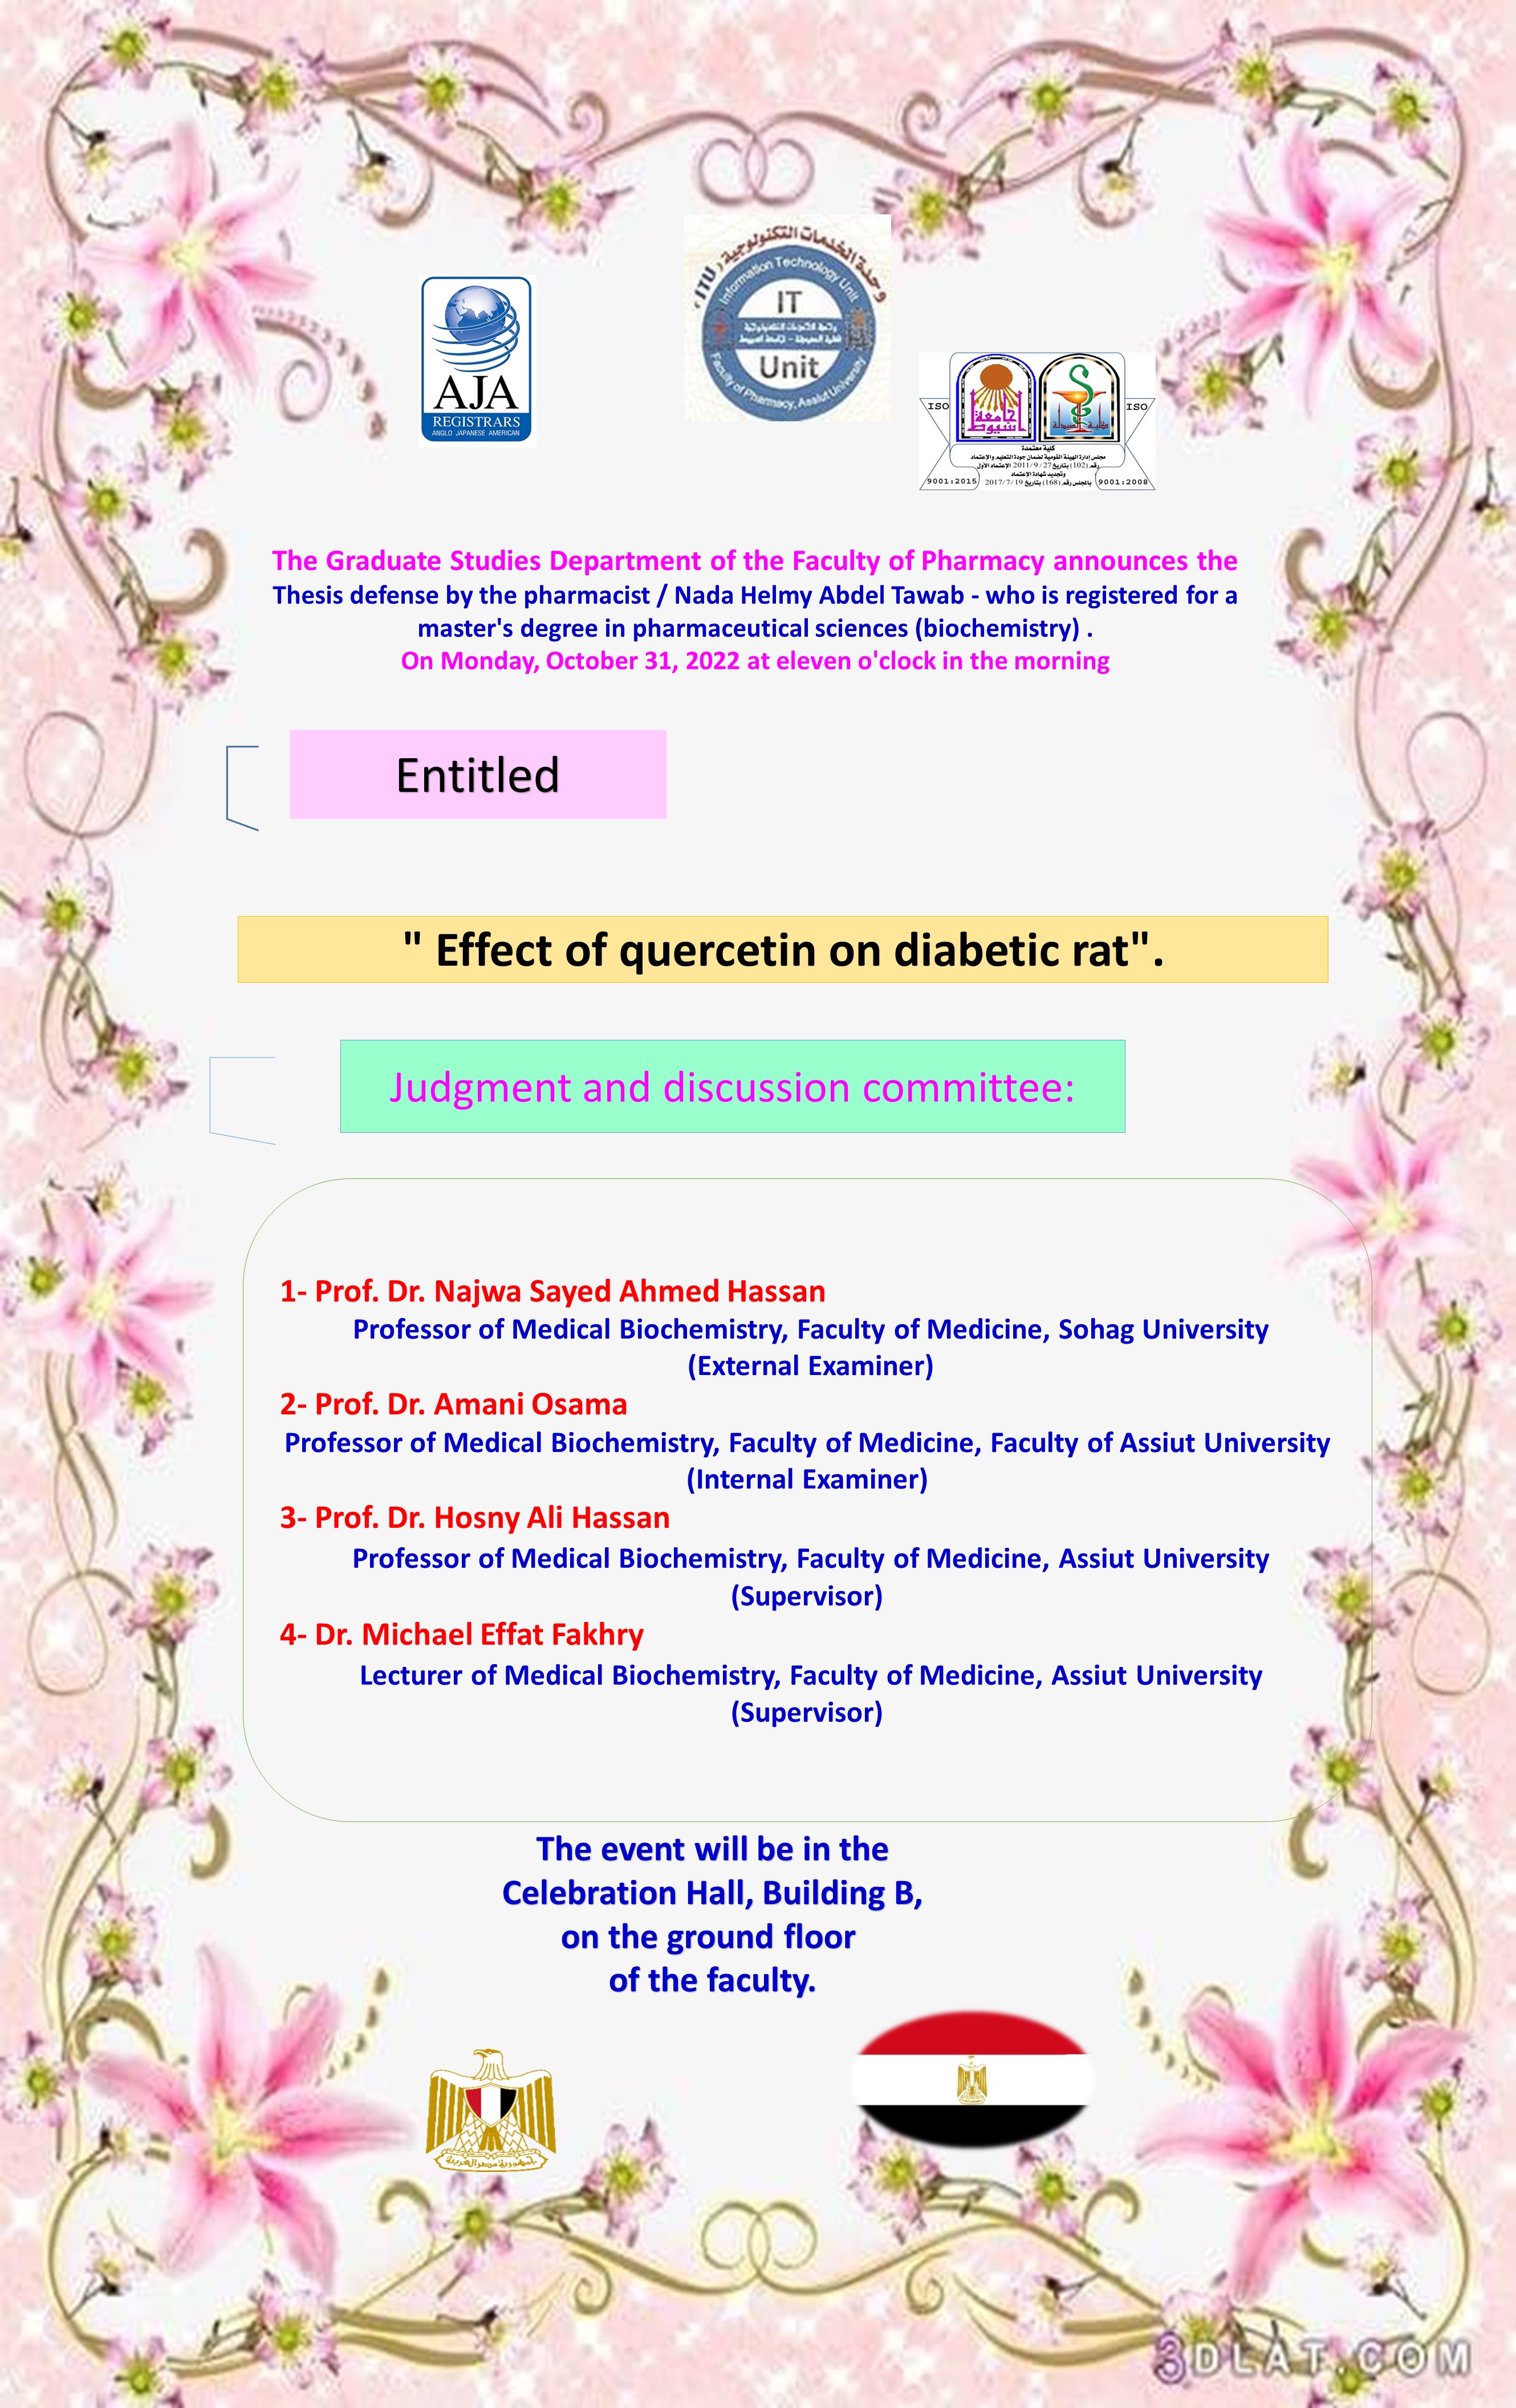 Thesis defense by the pharmacist / Nada Helmy Abdel Tawab - who is registered for a master's degree in pharmaceutical sciences (biochemistry)